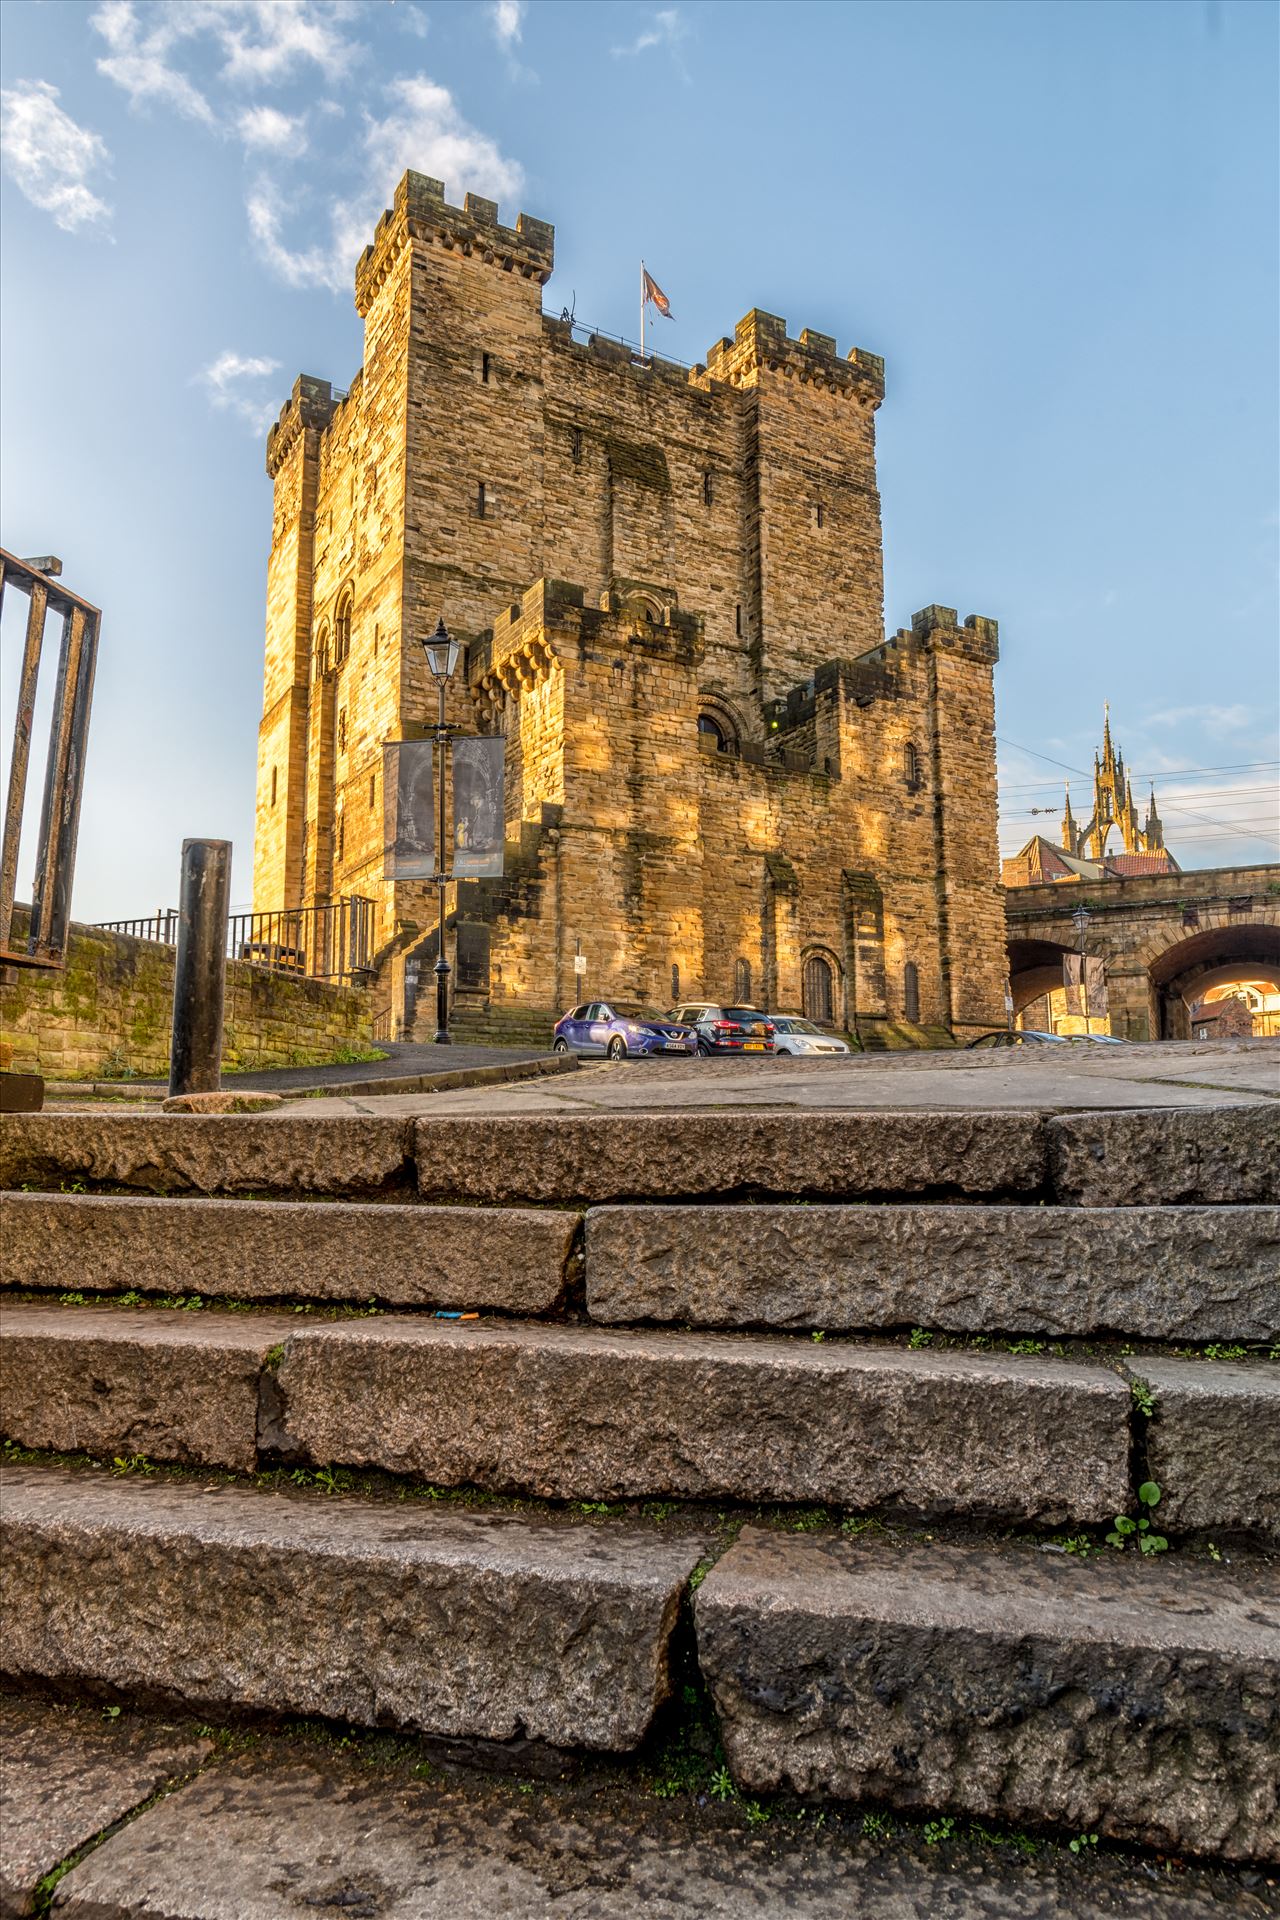 The Castle Keep The Castle, Newcastle is a medieval fortification in Newcastle upon Tyne, built on the site of the fortress which gave the City of Newcastle its name. by philreay